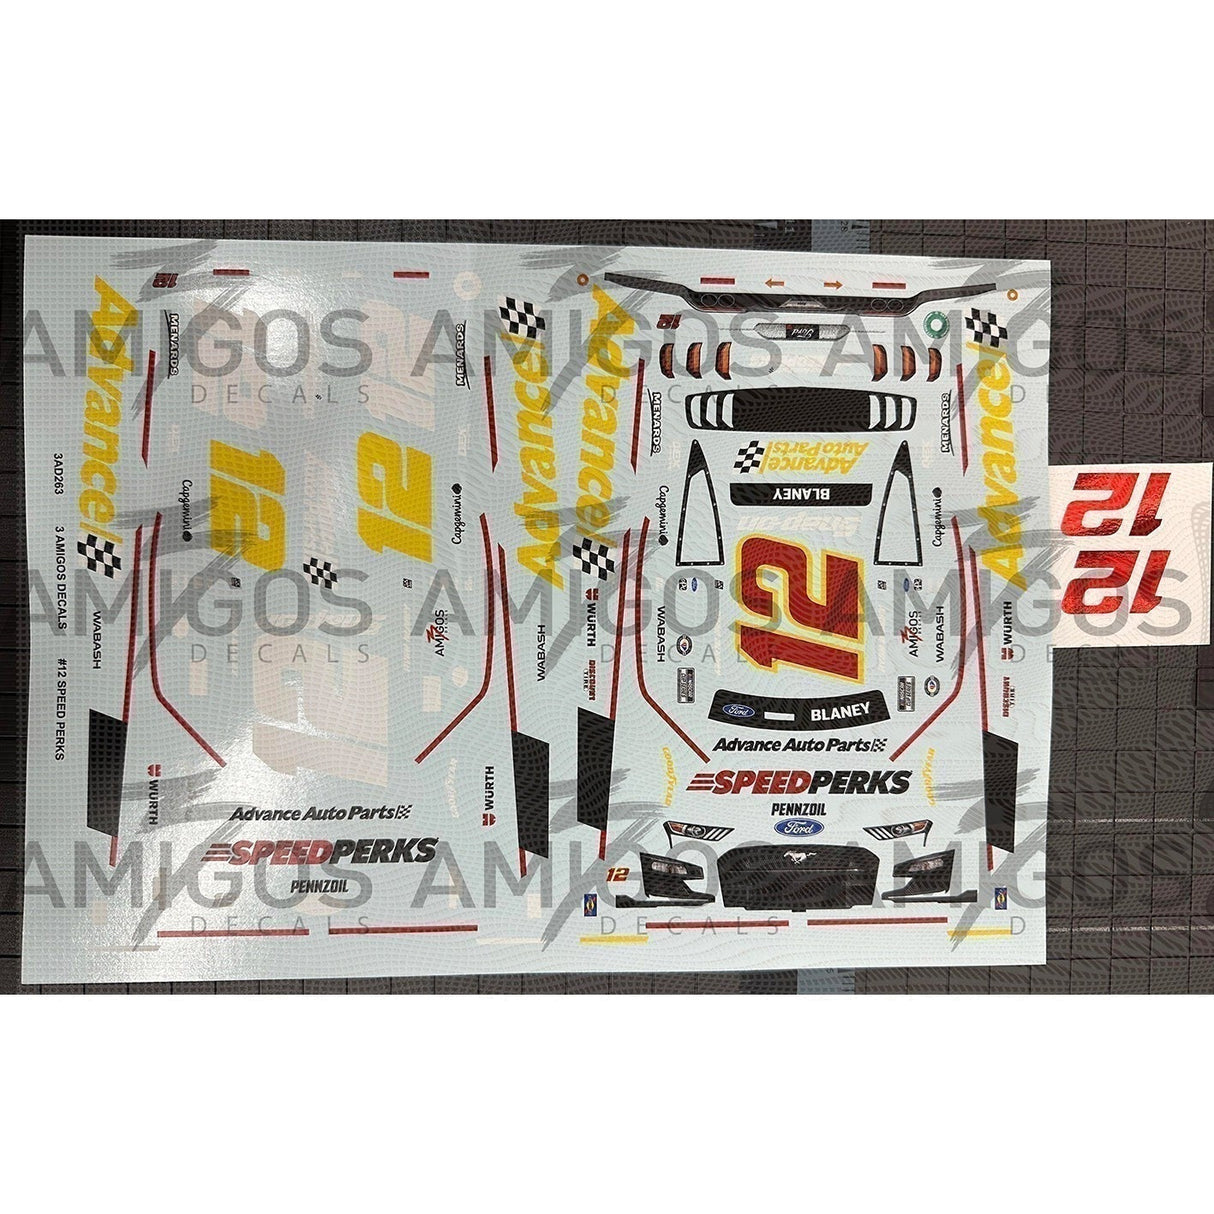 3 Amigos Decals #12 SPEED PERKS 2023 MUSTANG WITH RED FOIL NUMBERS 1:24 DECAL SET